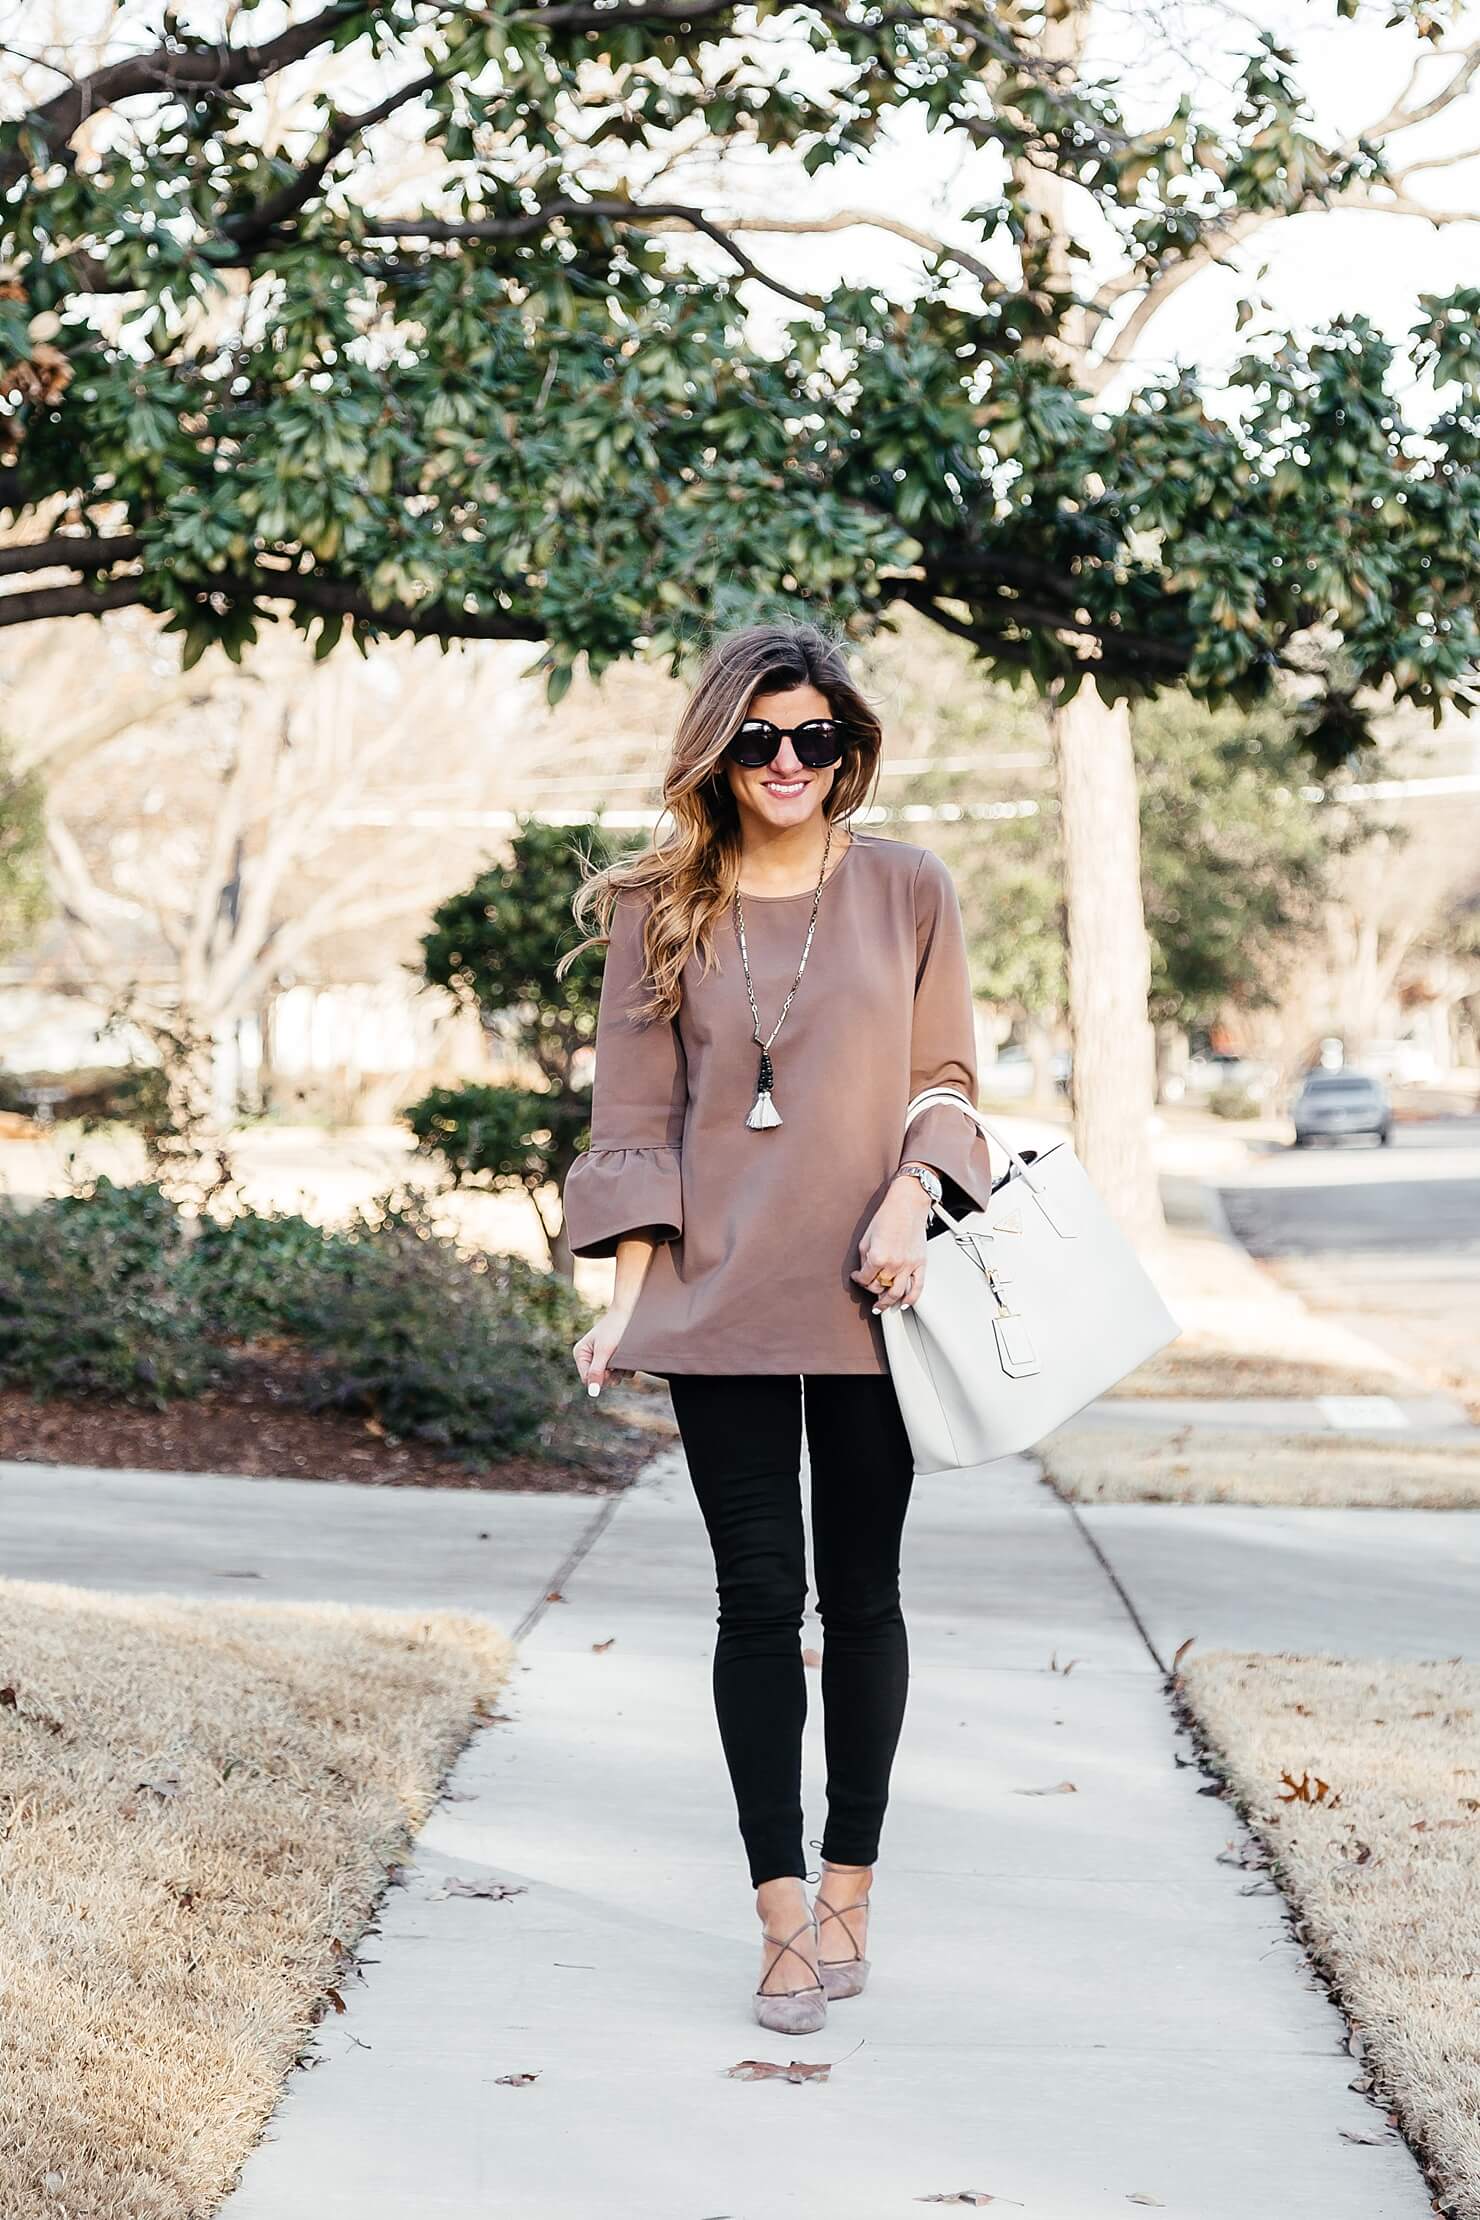 brighton the day peplum sleeve top and black pants with lace up flats